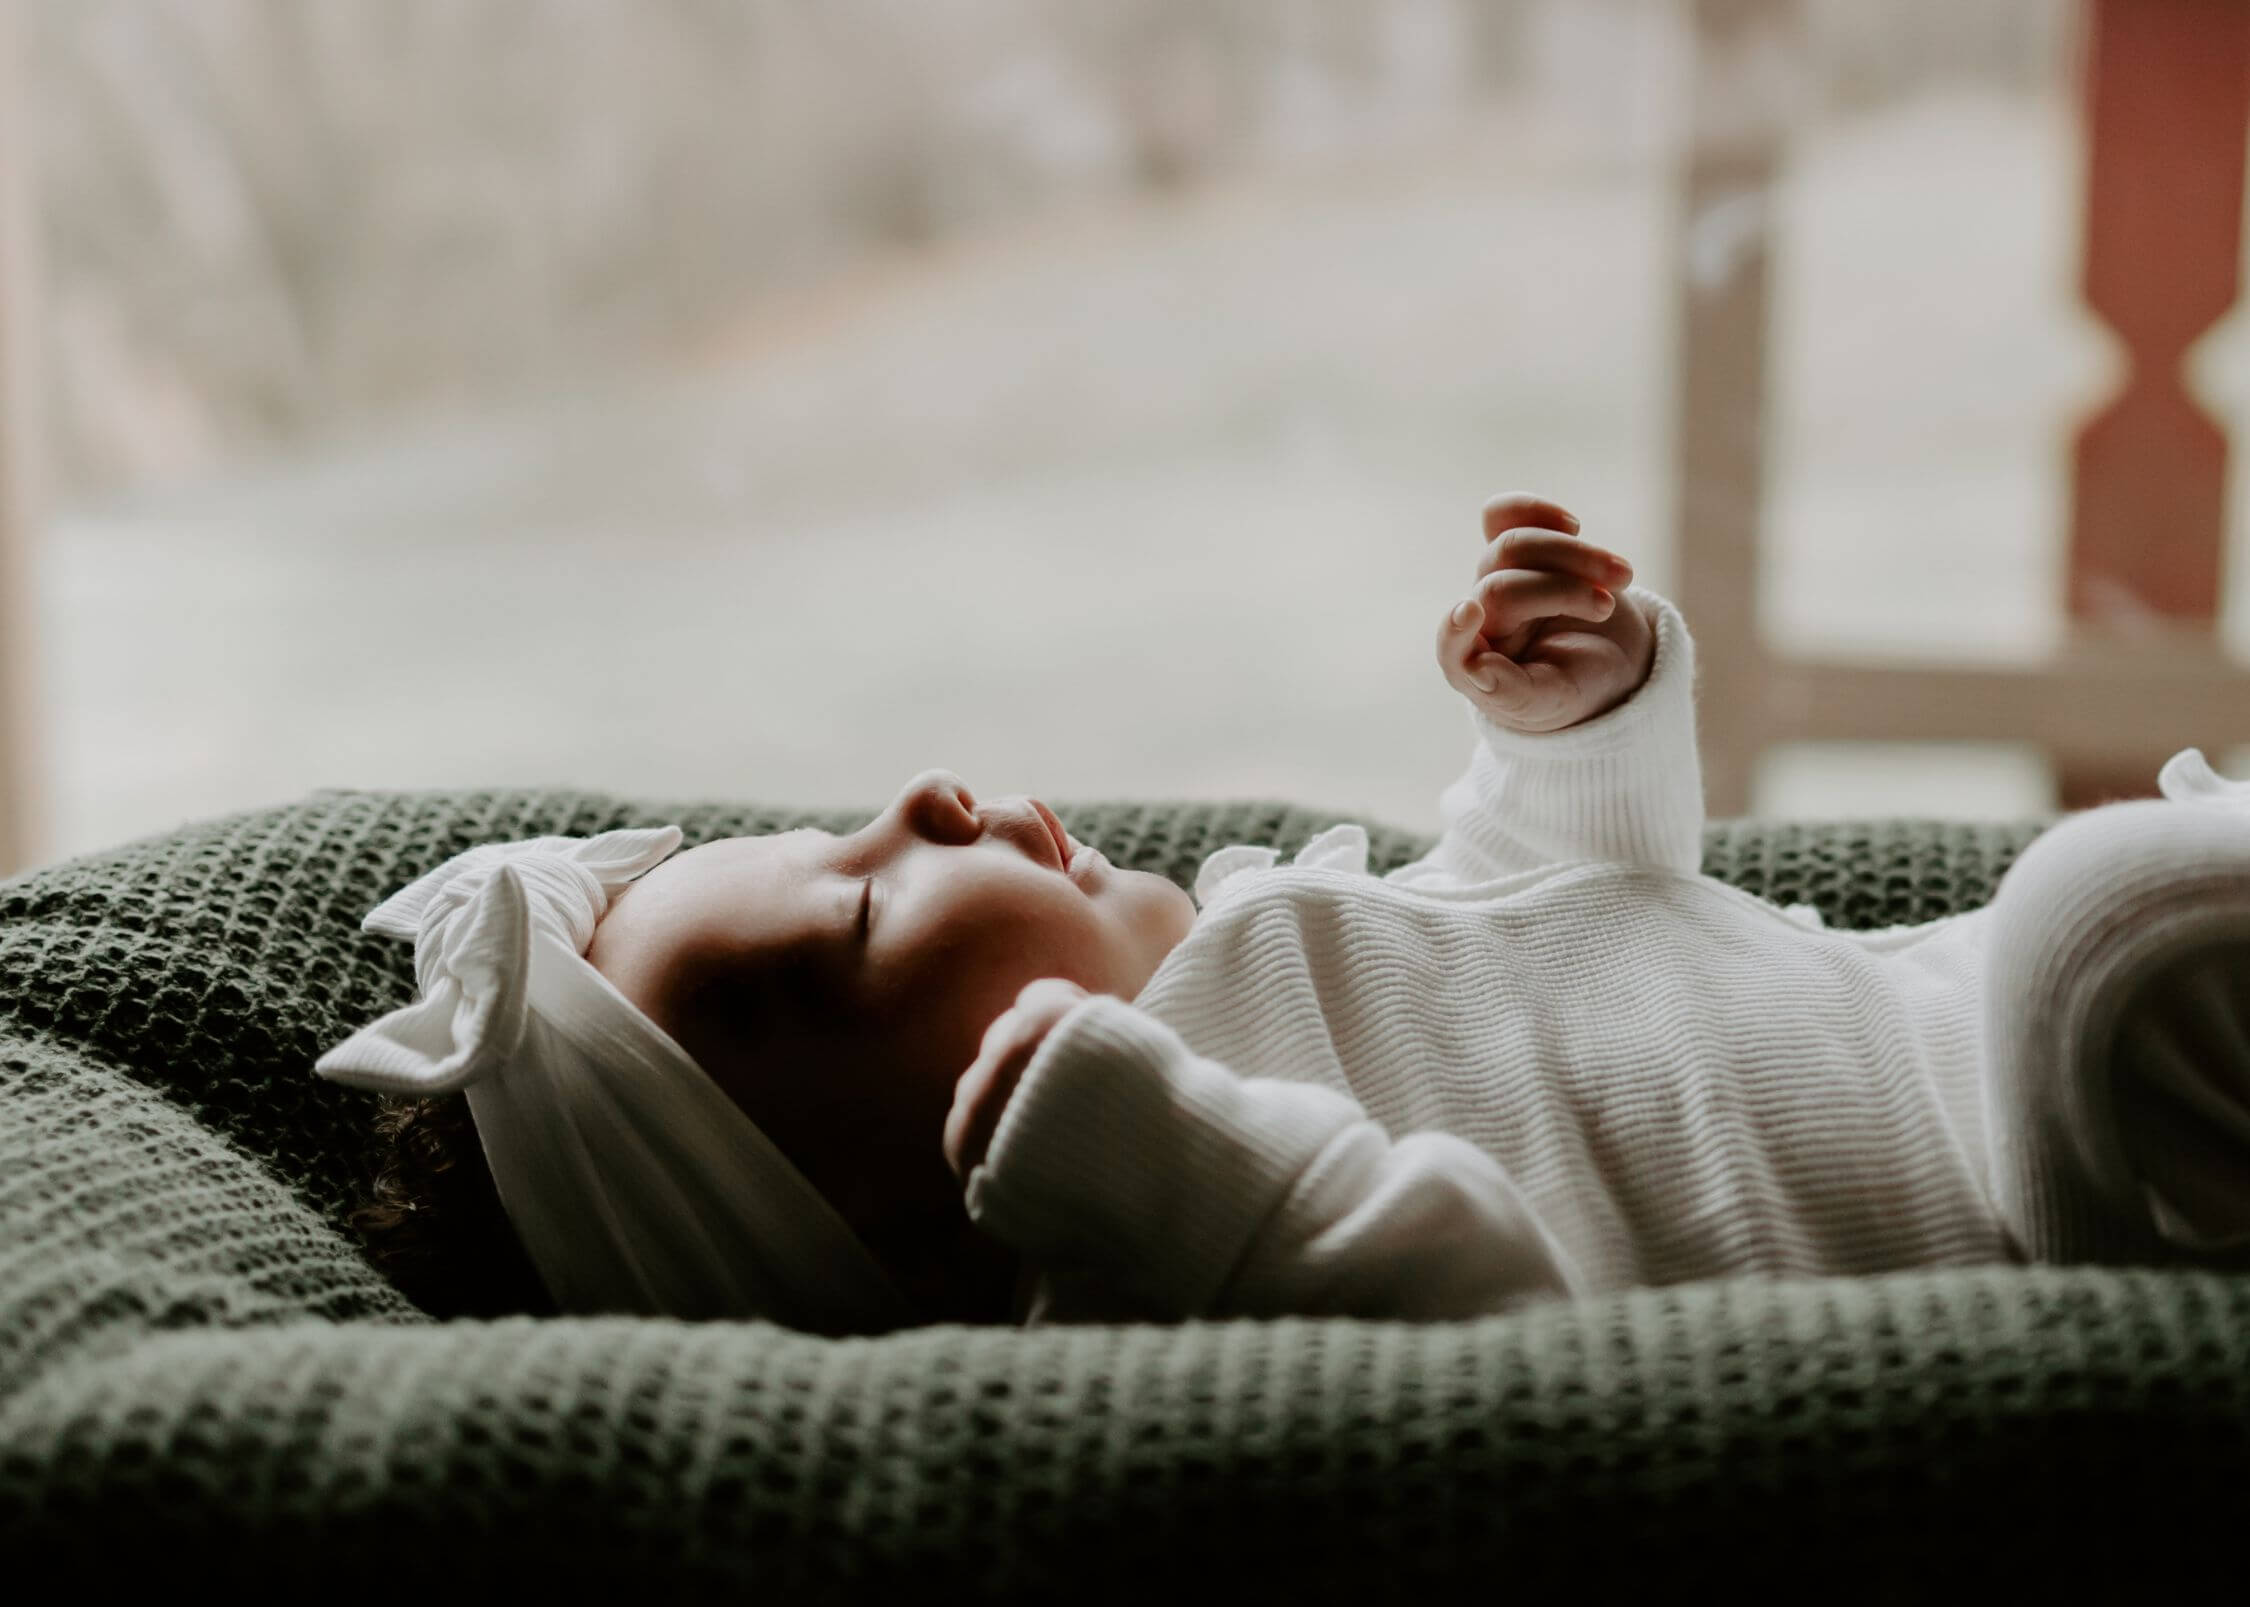 A newborn baby sleeps in a pad in a white onesie and bow